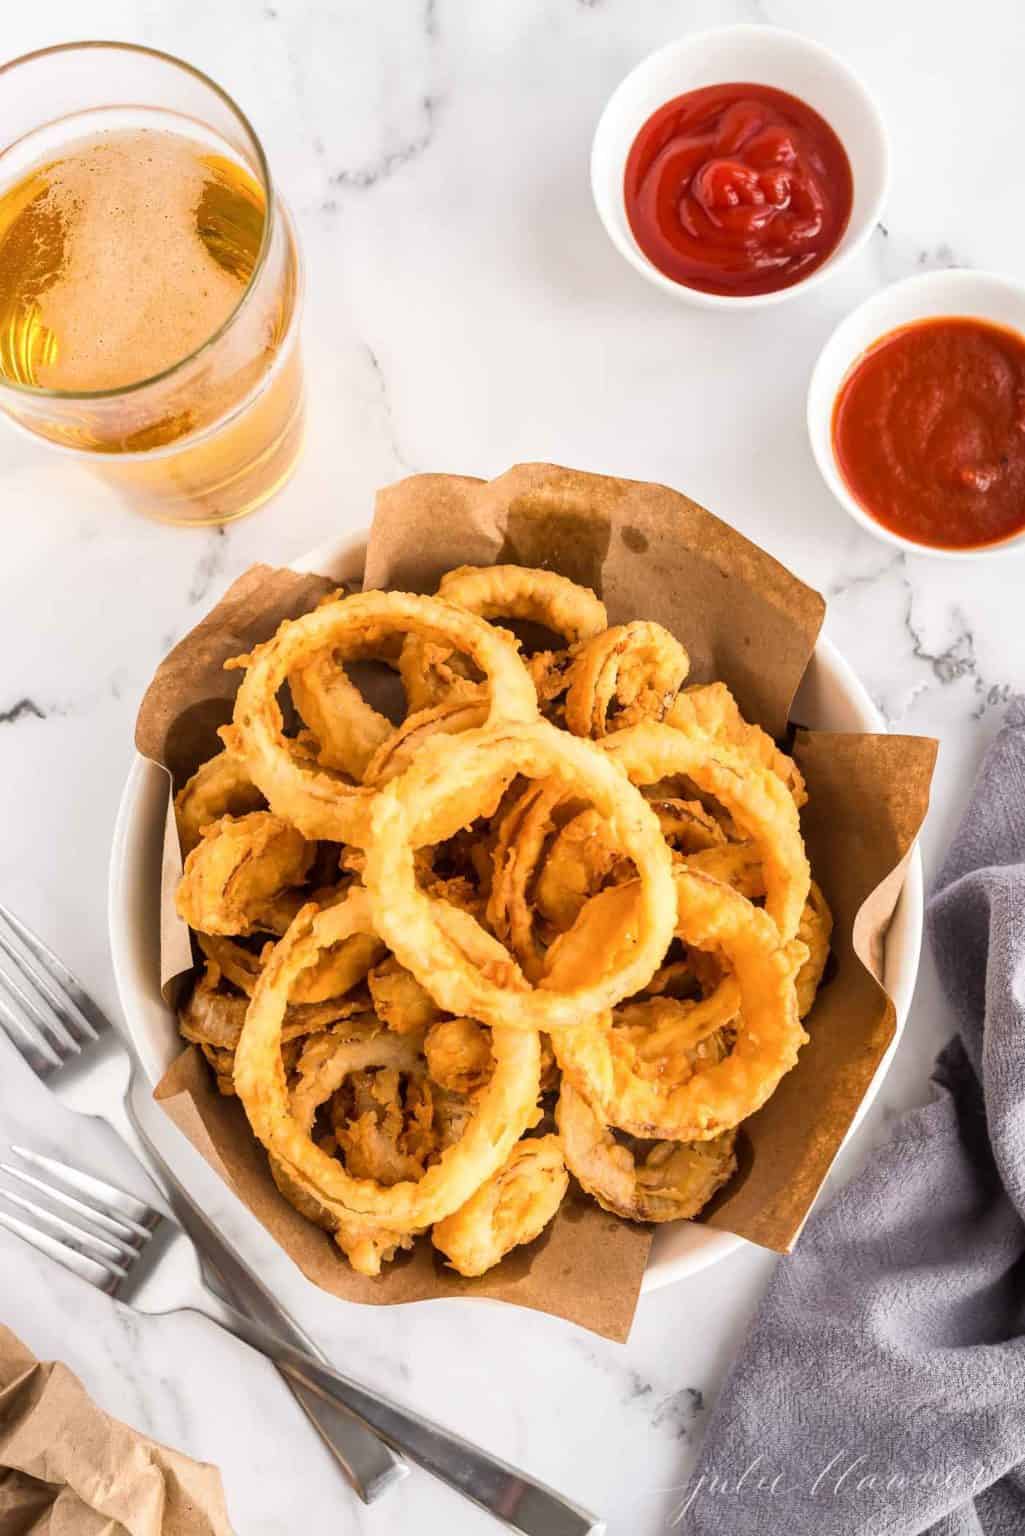 Homemade Onion Rings Dipped In Beer Batter with Video | Julie Blanner